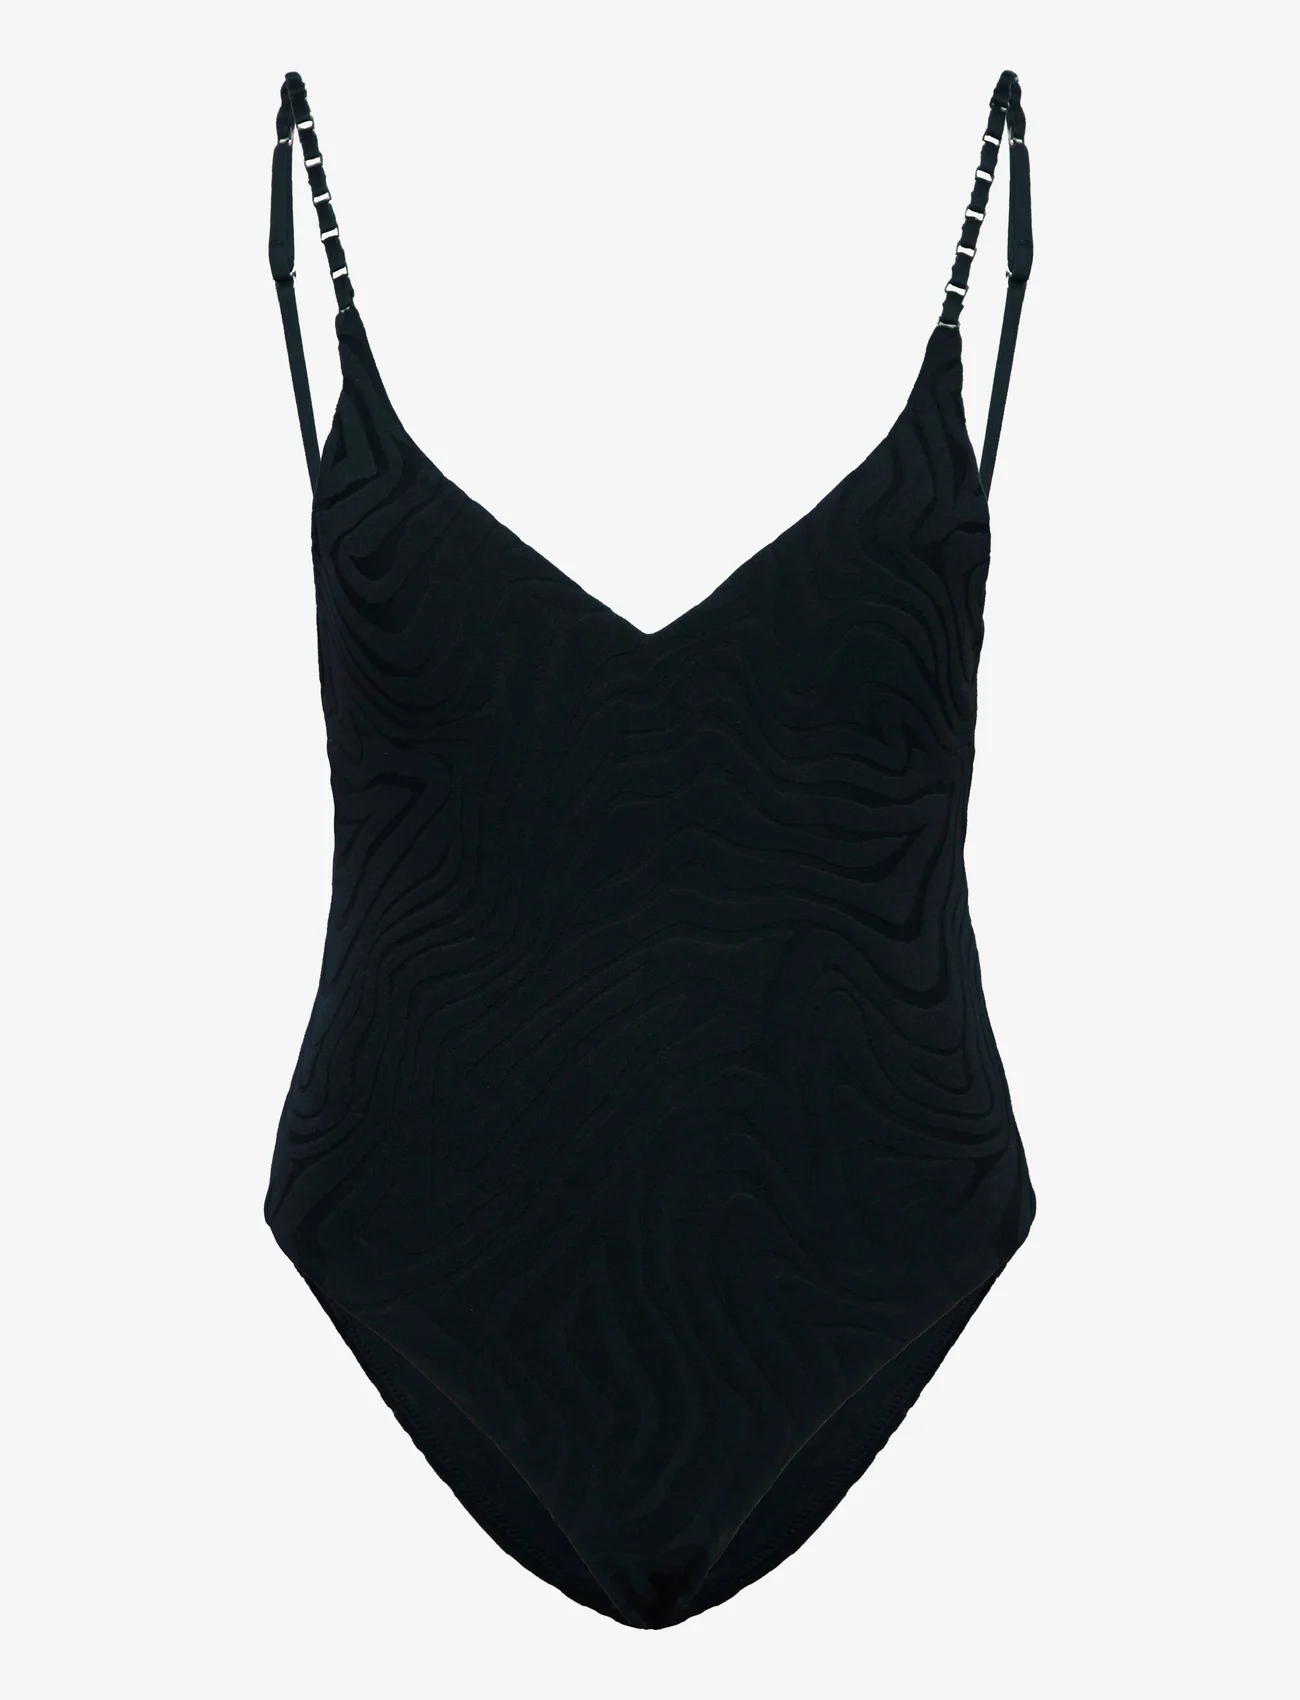 Seafolly - Second Wave V Neck One Piece - swimsuits - black - 0